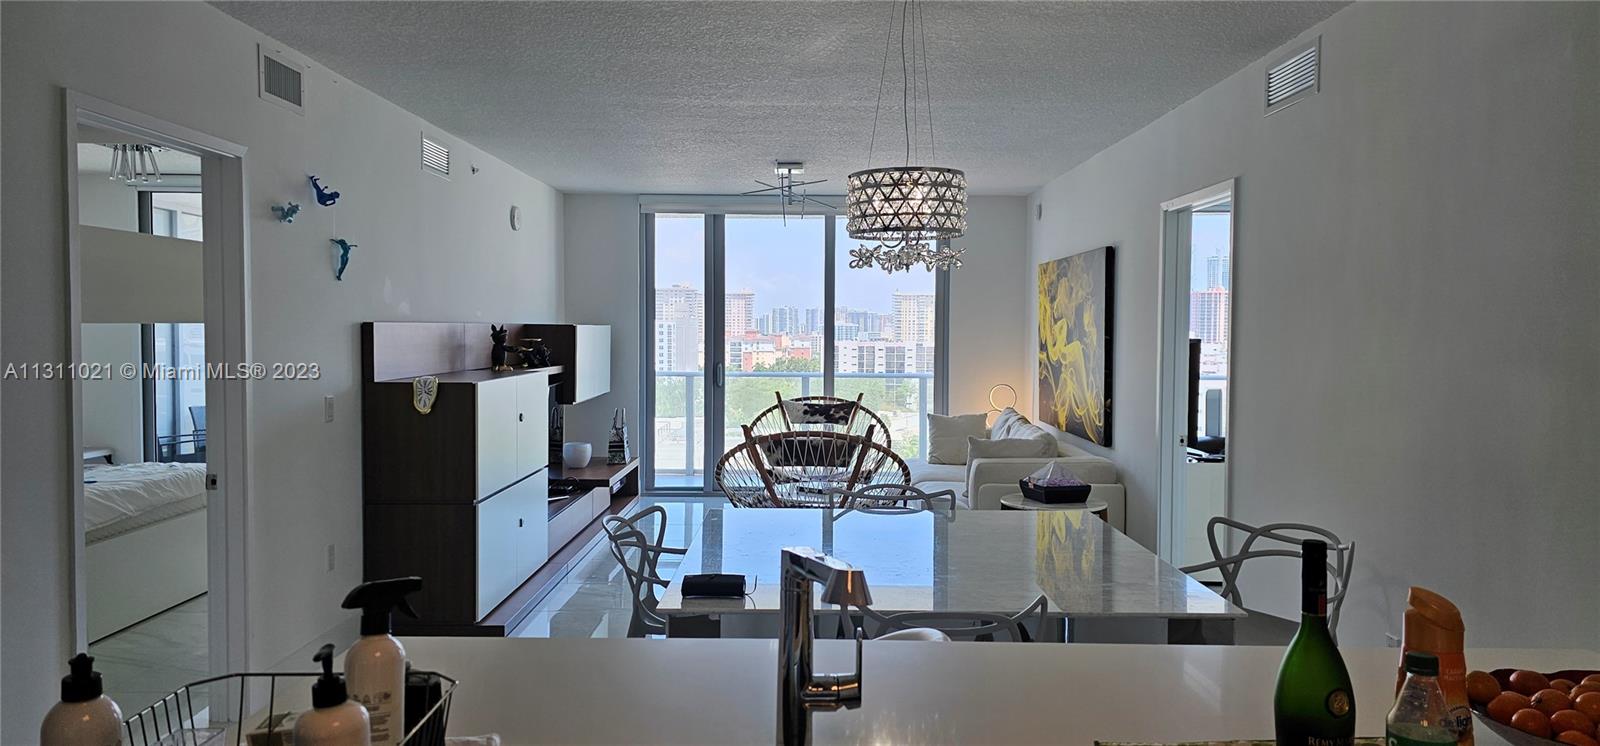 Photo 1 of Parque Towers E Apt 5-1005 in Sunny Isles Beach - MLS A11311021